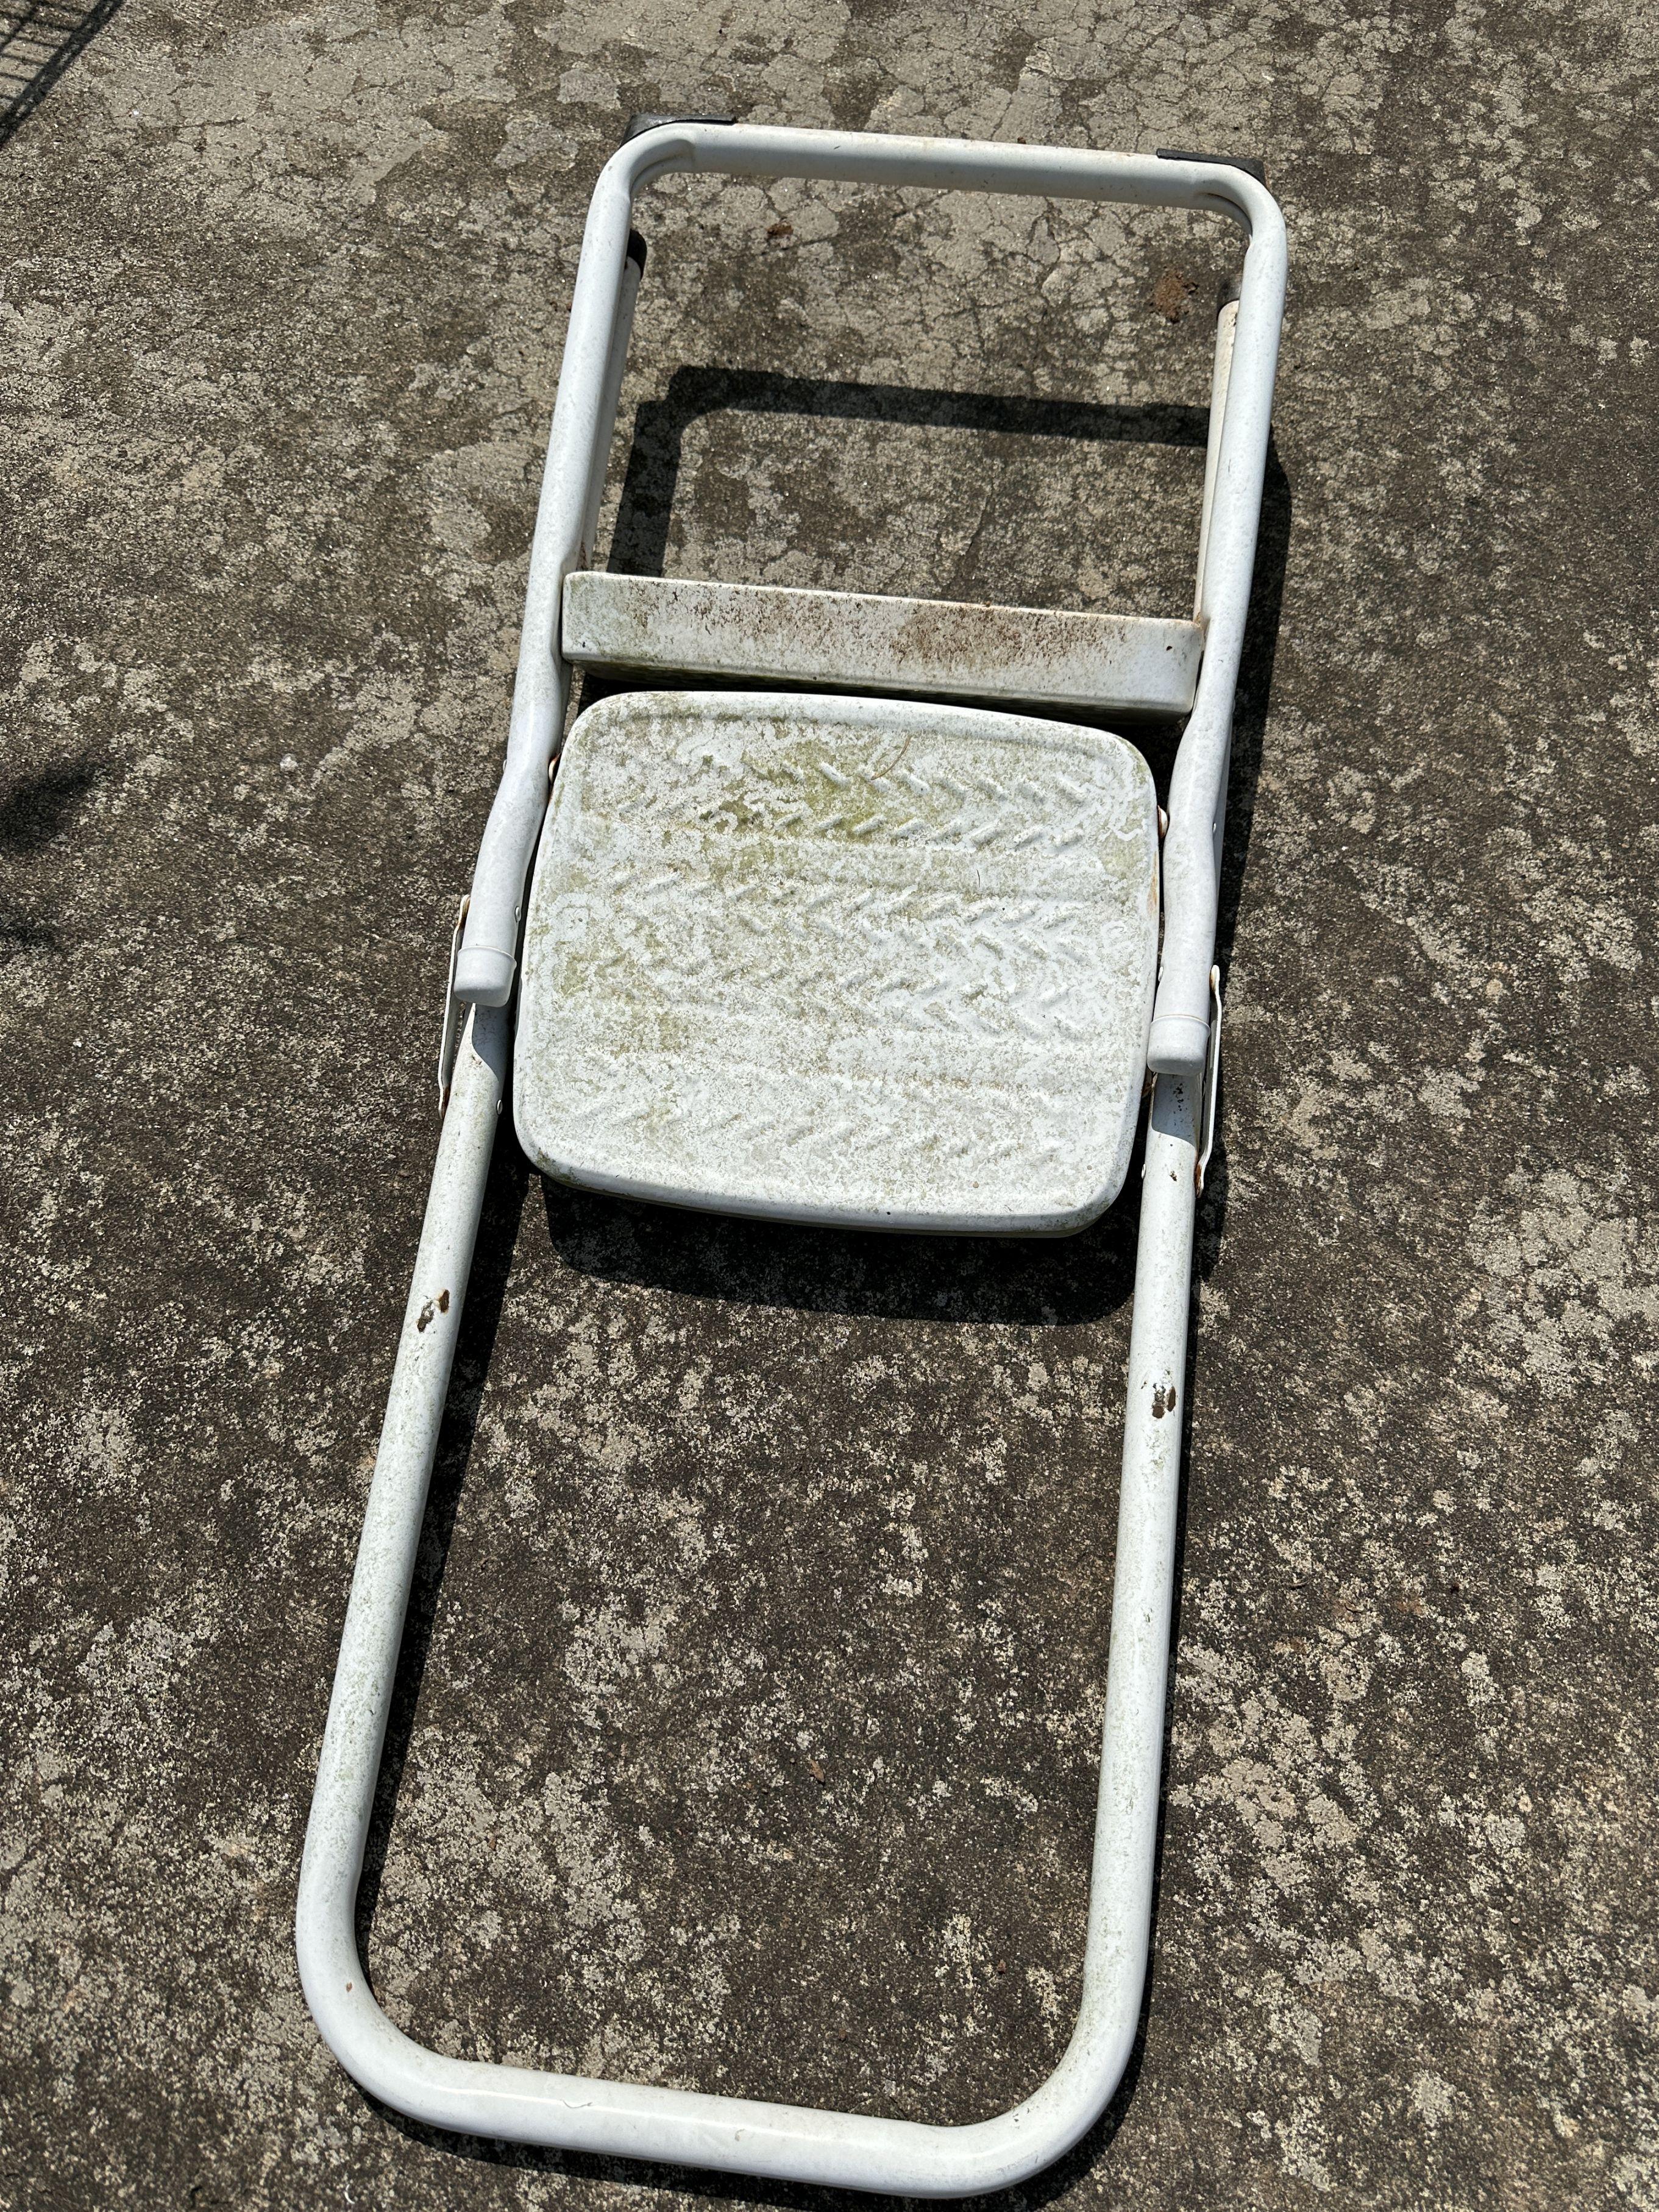 2 Step Folding Ladder (Local Pick Up Only)